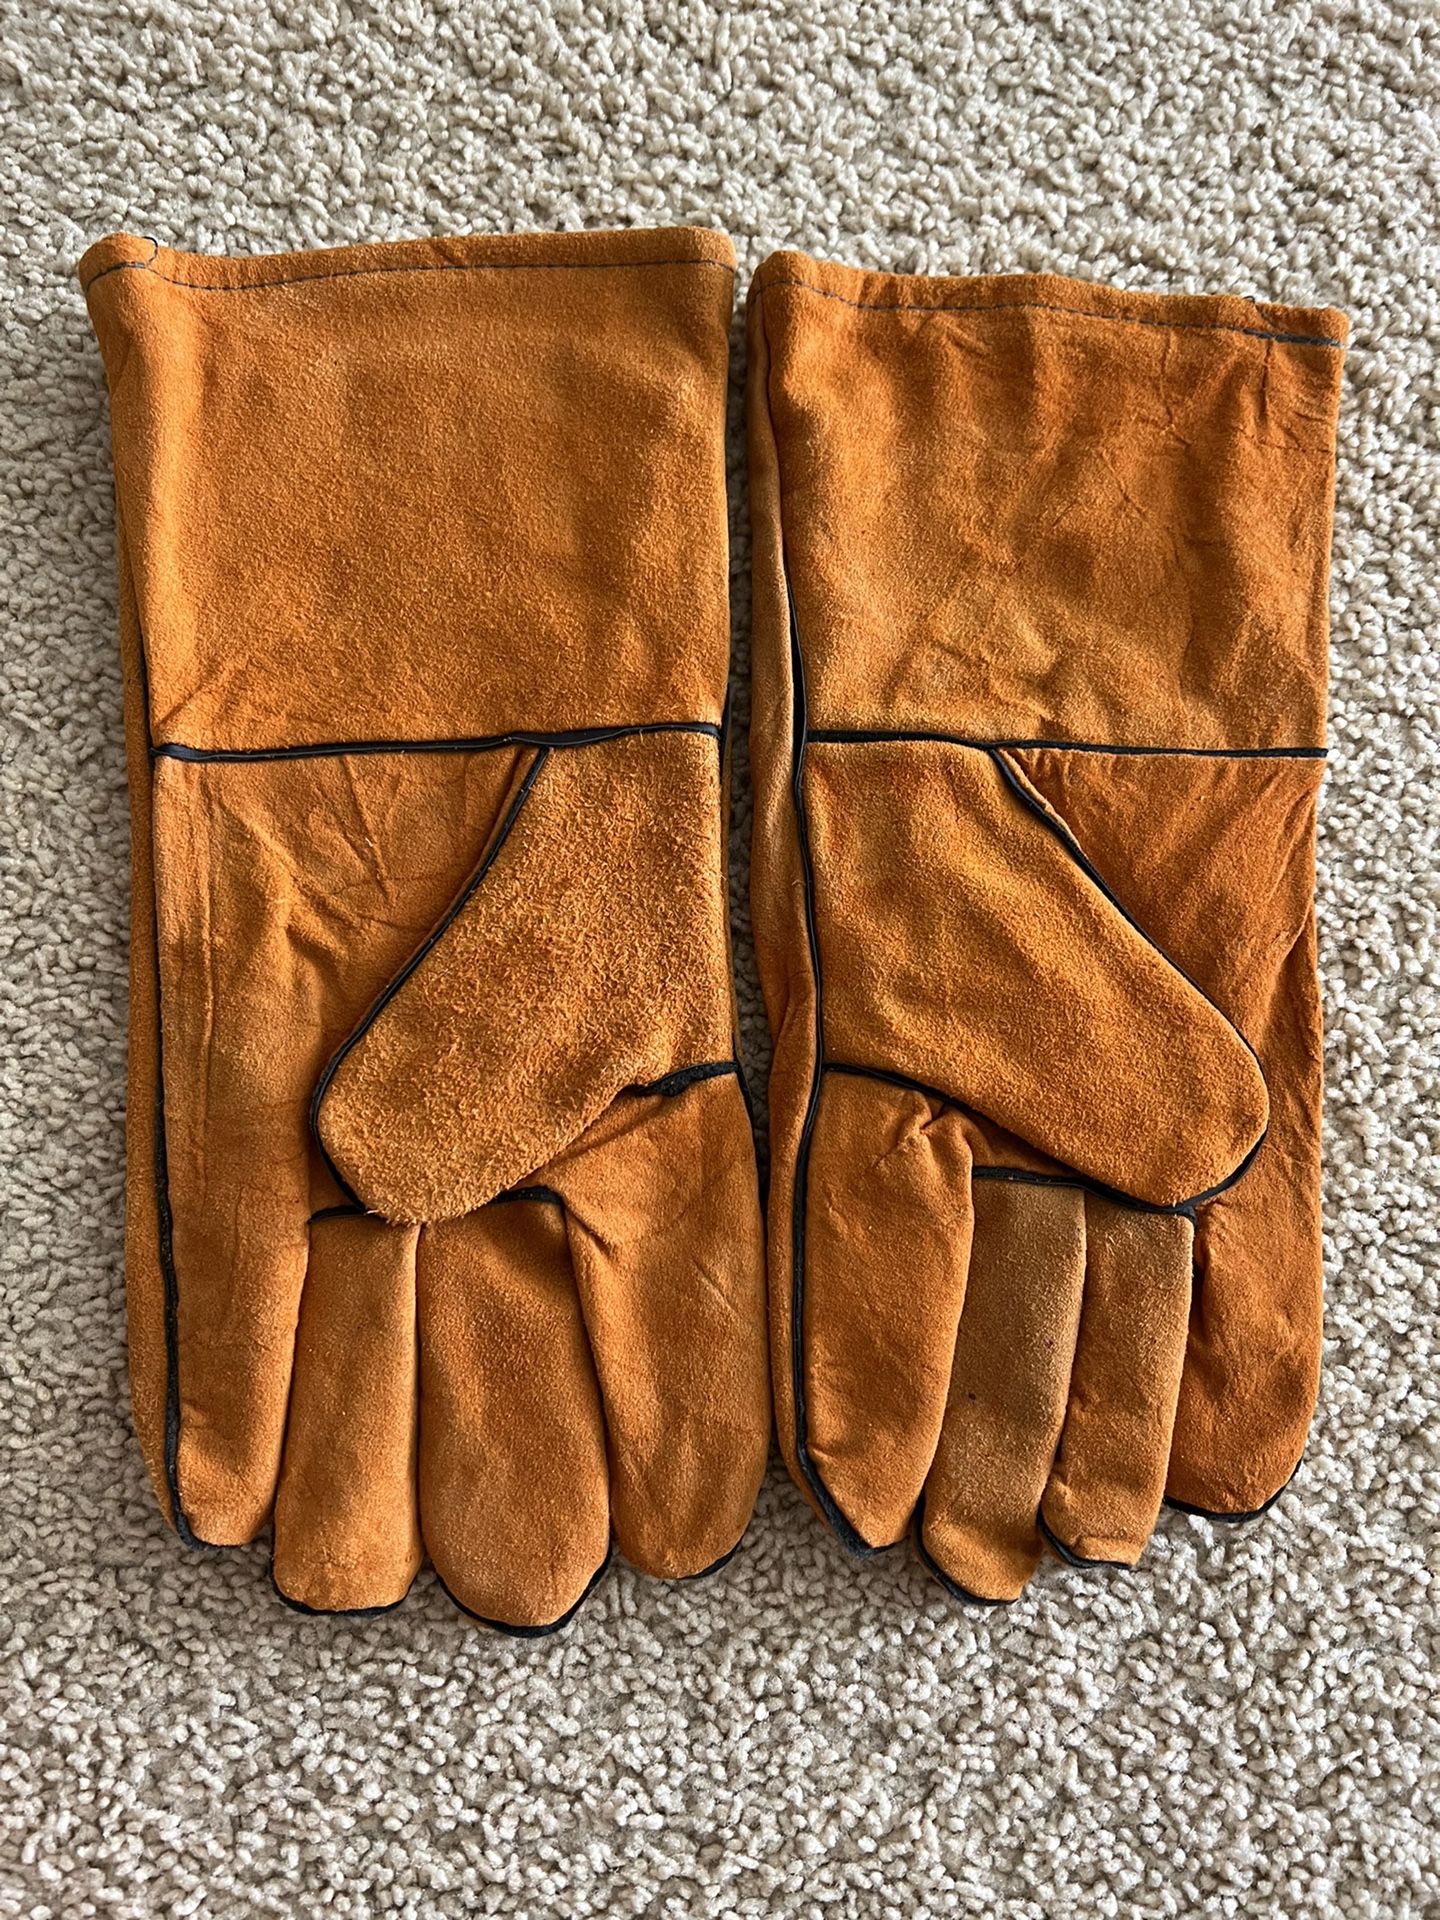 Leather Men's Welding , Extra Length Leather Gloves | BBQ Grilling Gloves | Great for Cooking | Protects Hands from Heat | Rugged but Comfortable